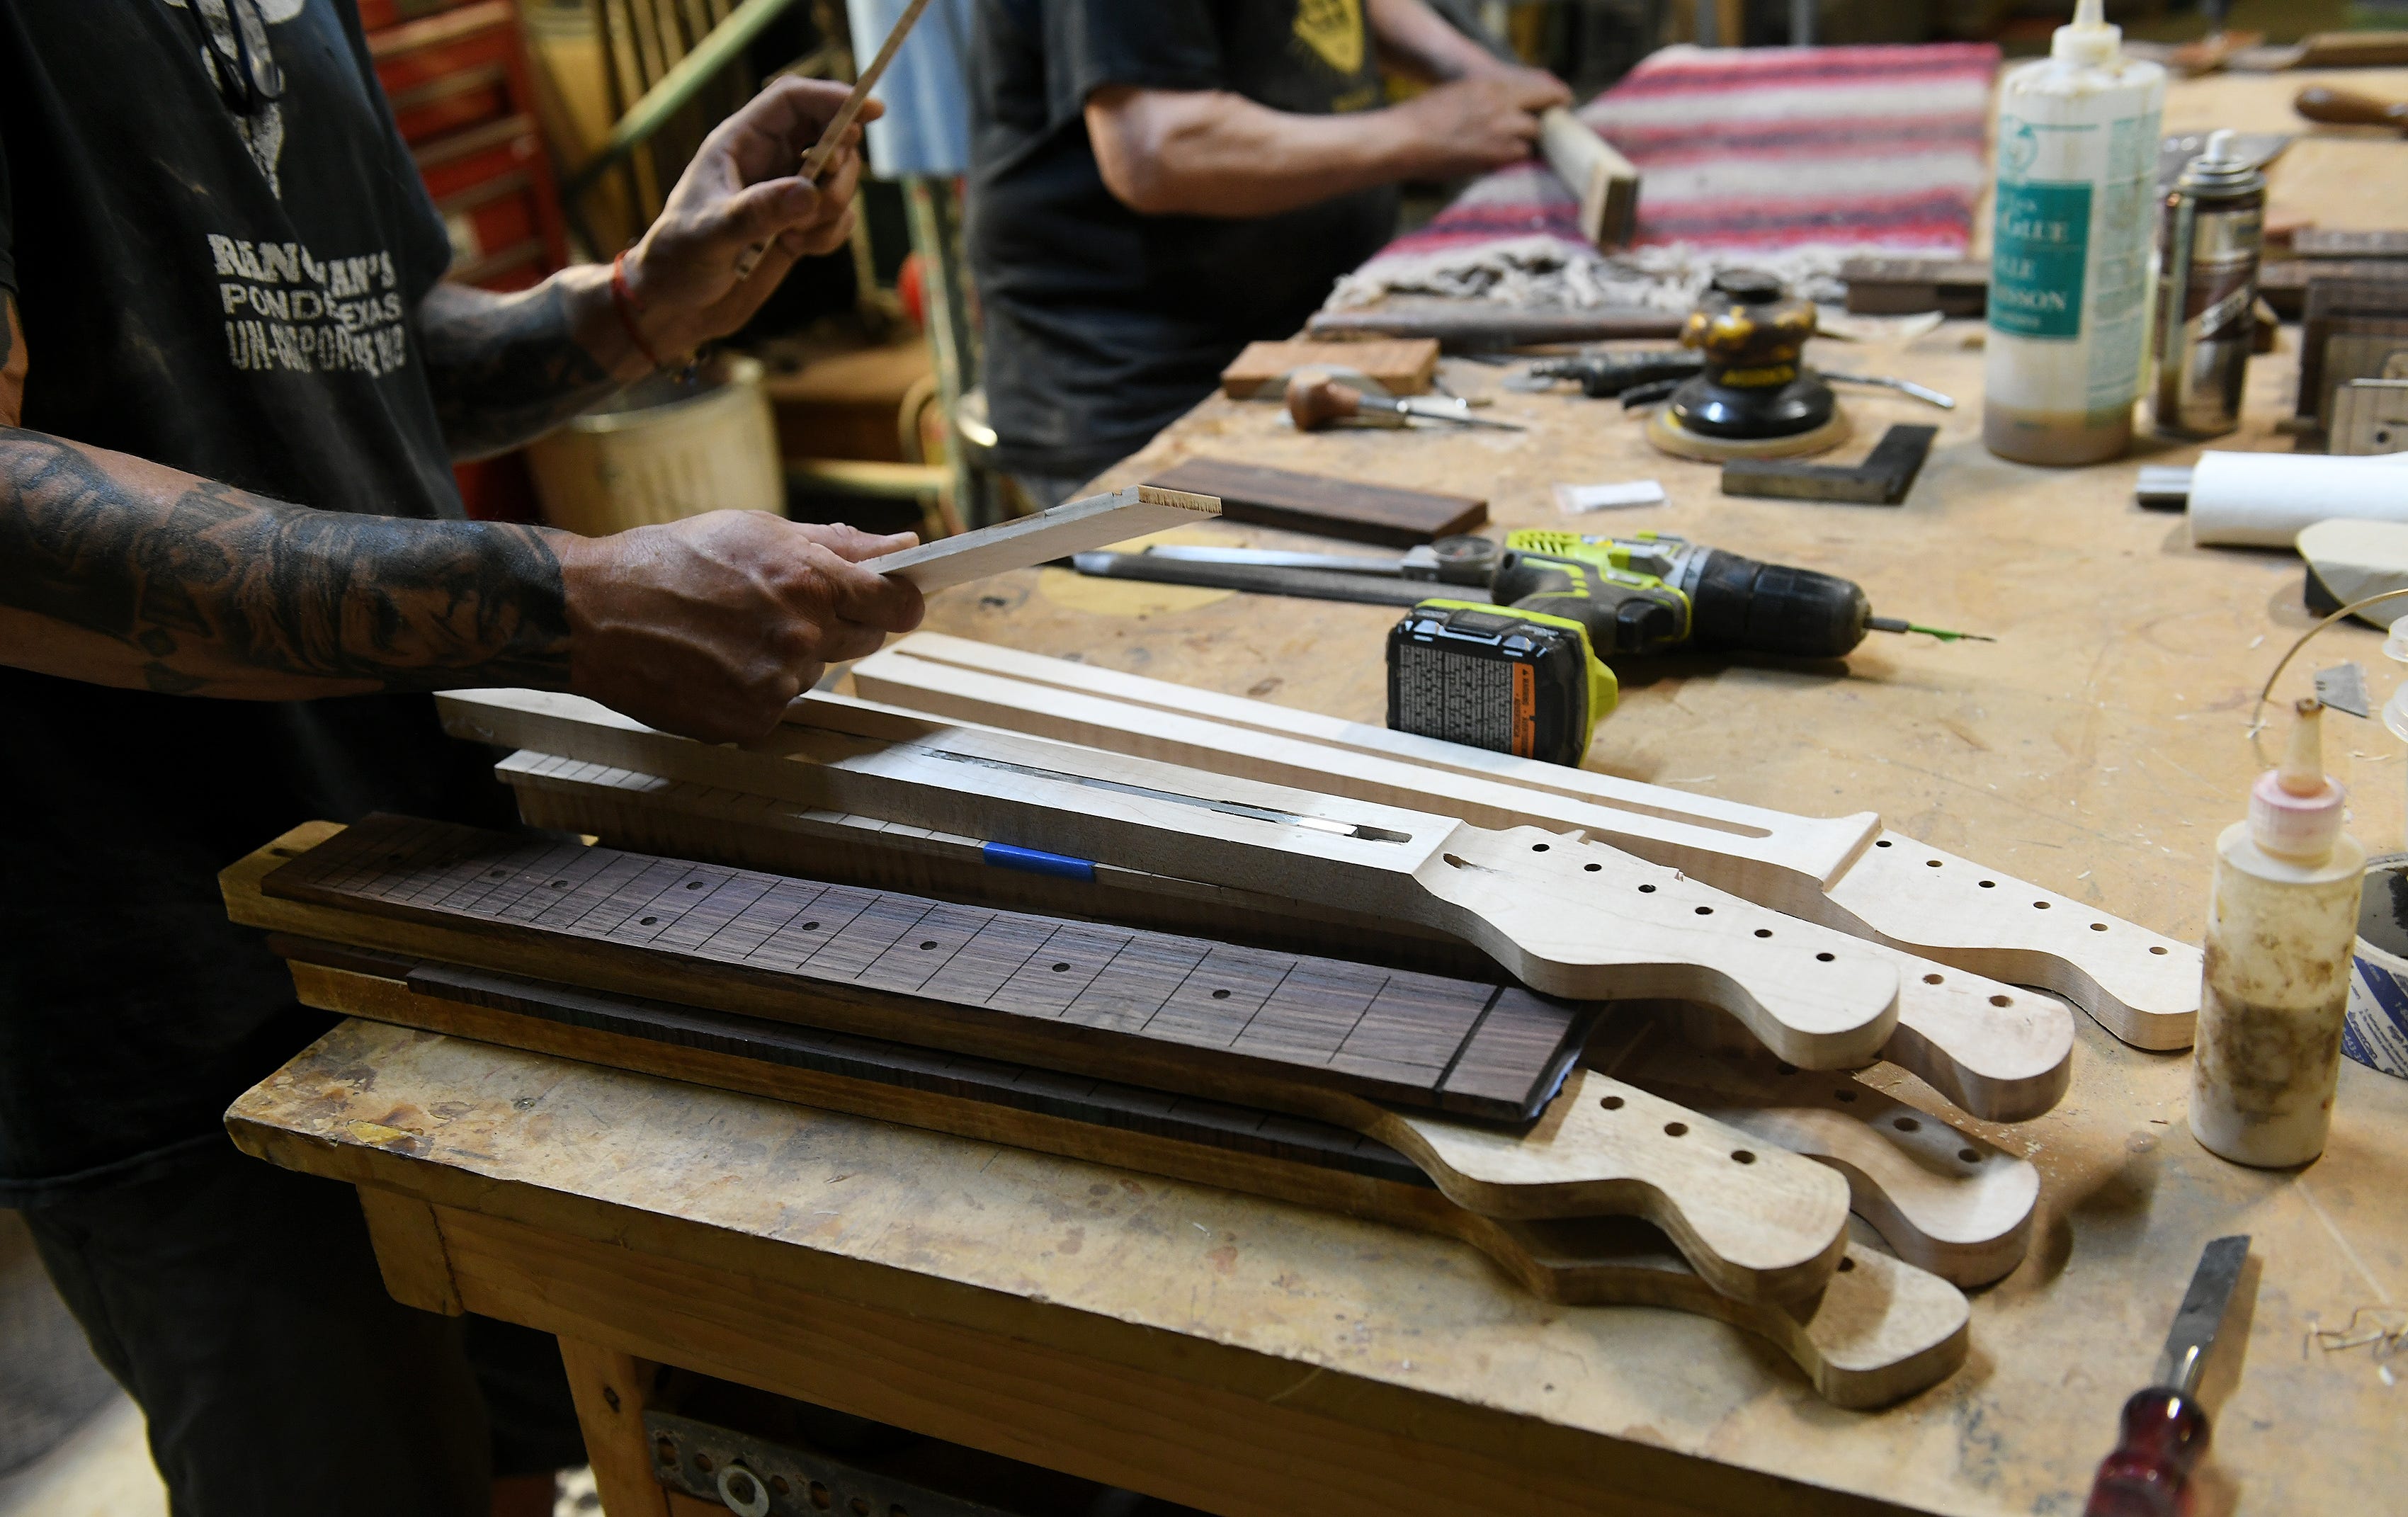 Echopark founder Gabriel Currie looks at guitar necks made from different types of wood at Echopark Guitars in Detroit on July 21, 2023.